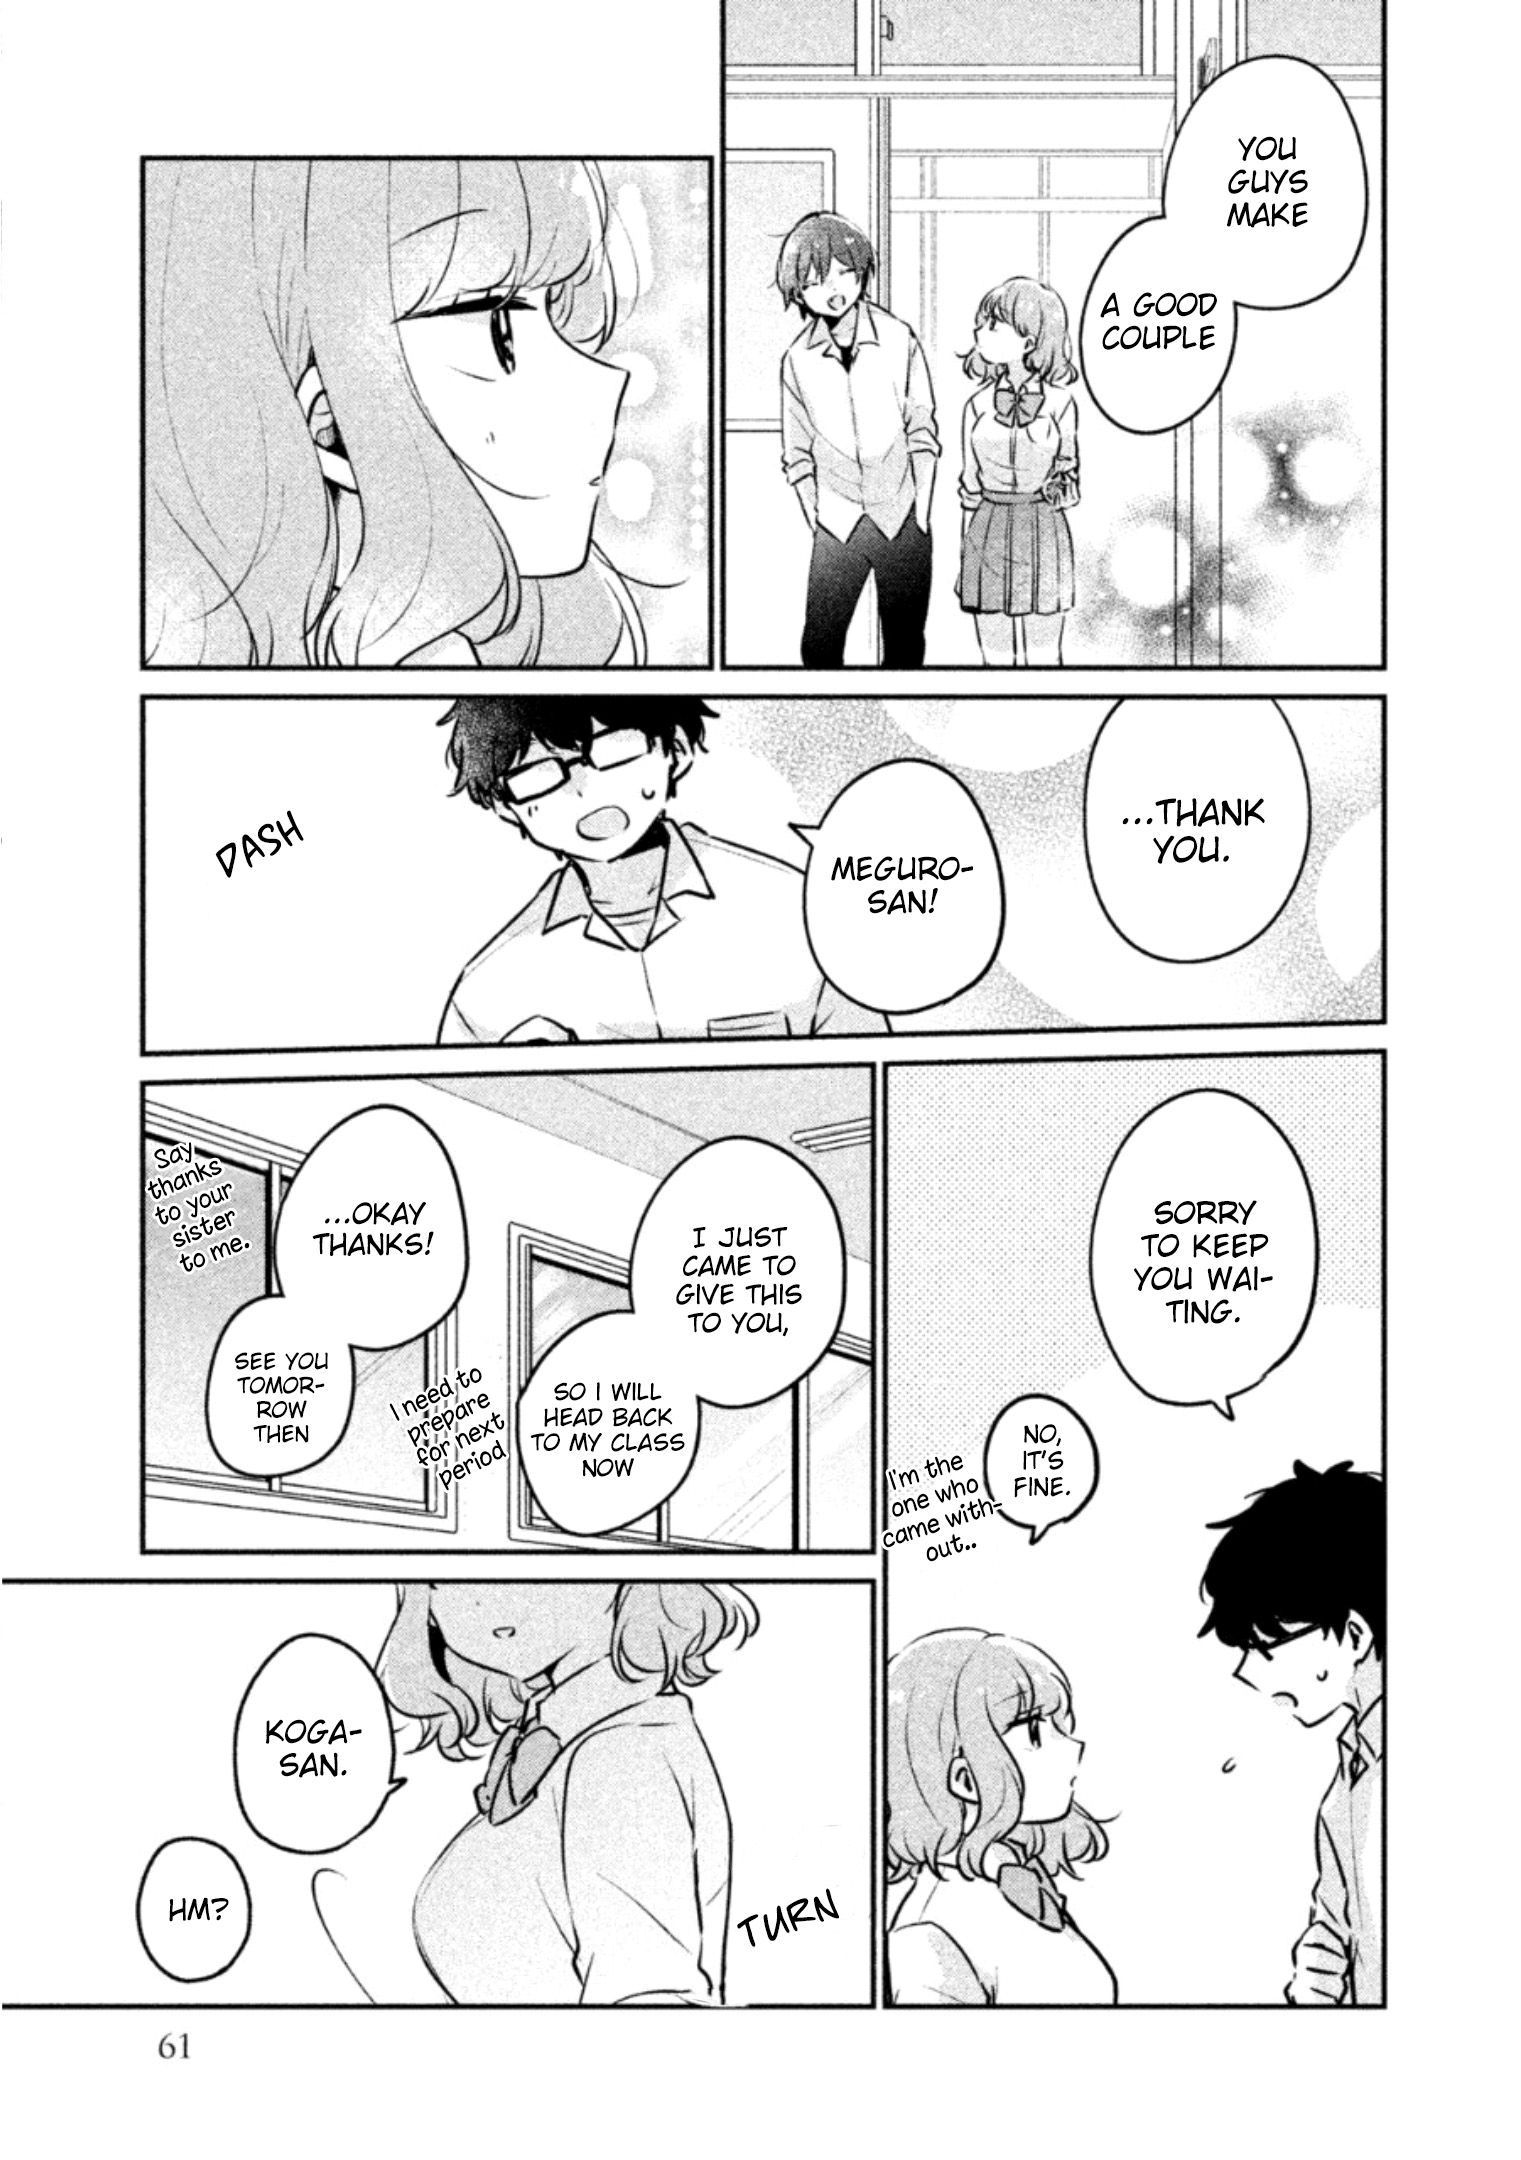 It's Not Meguro-san's First Time chapter 21 page 14